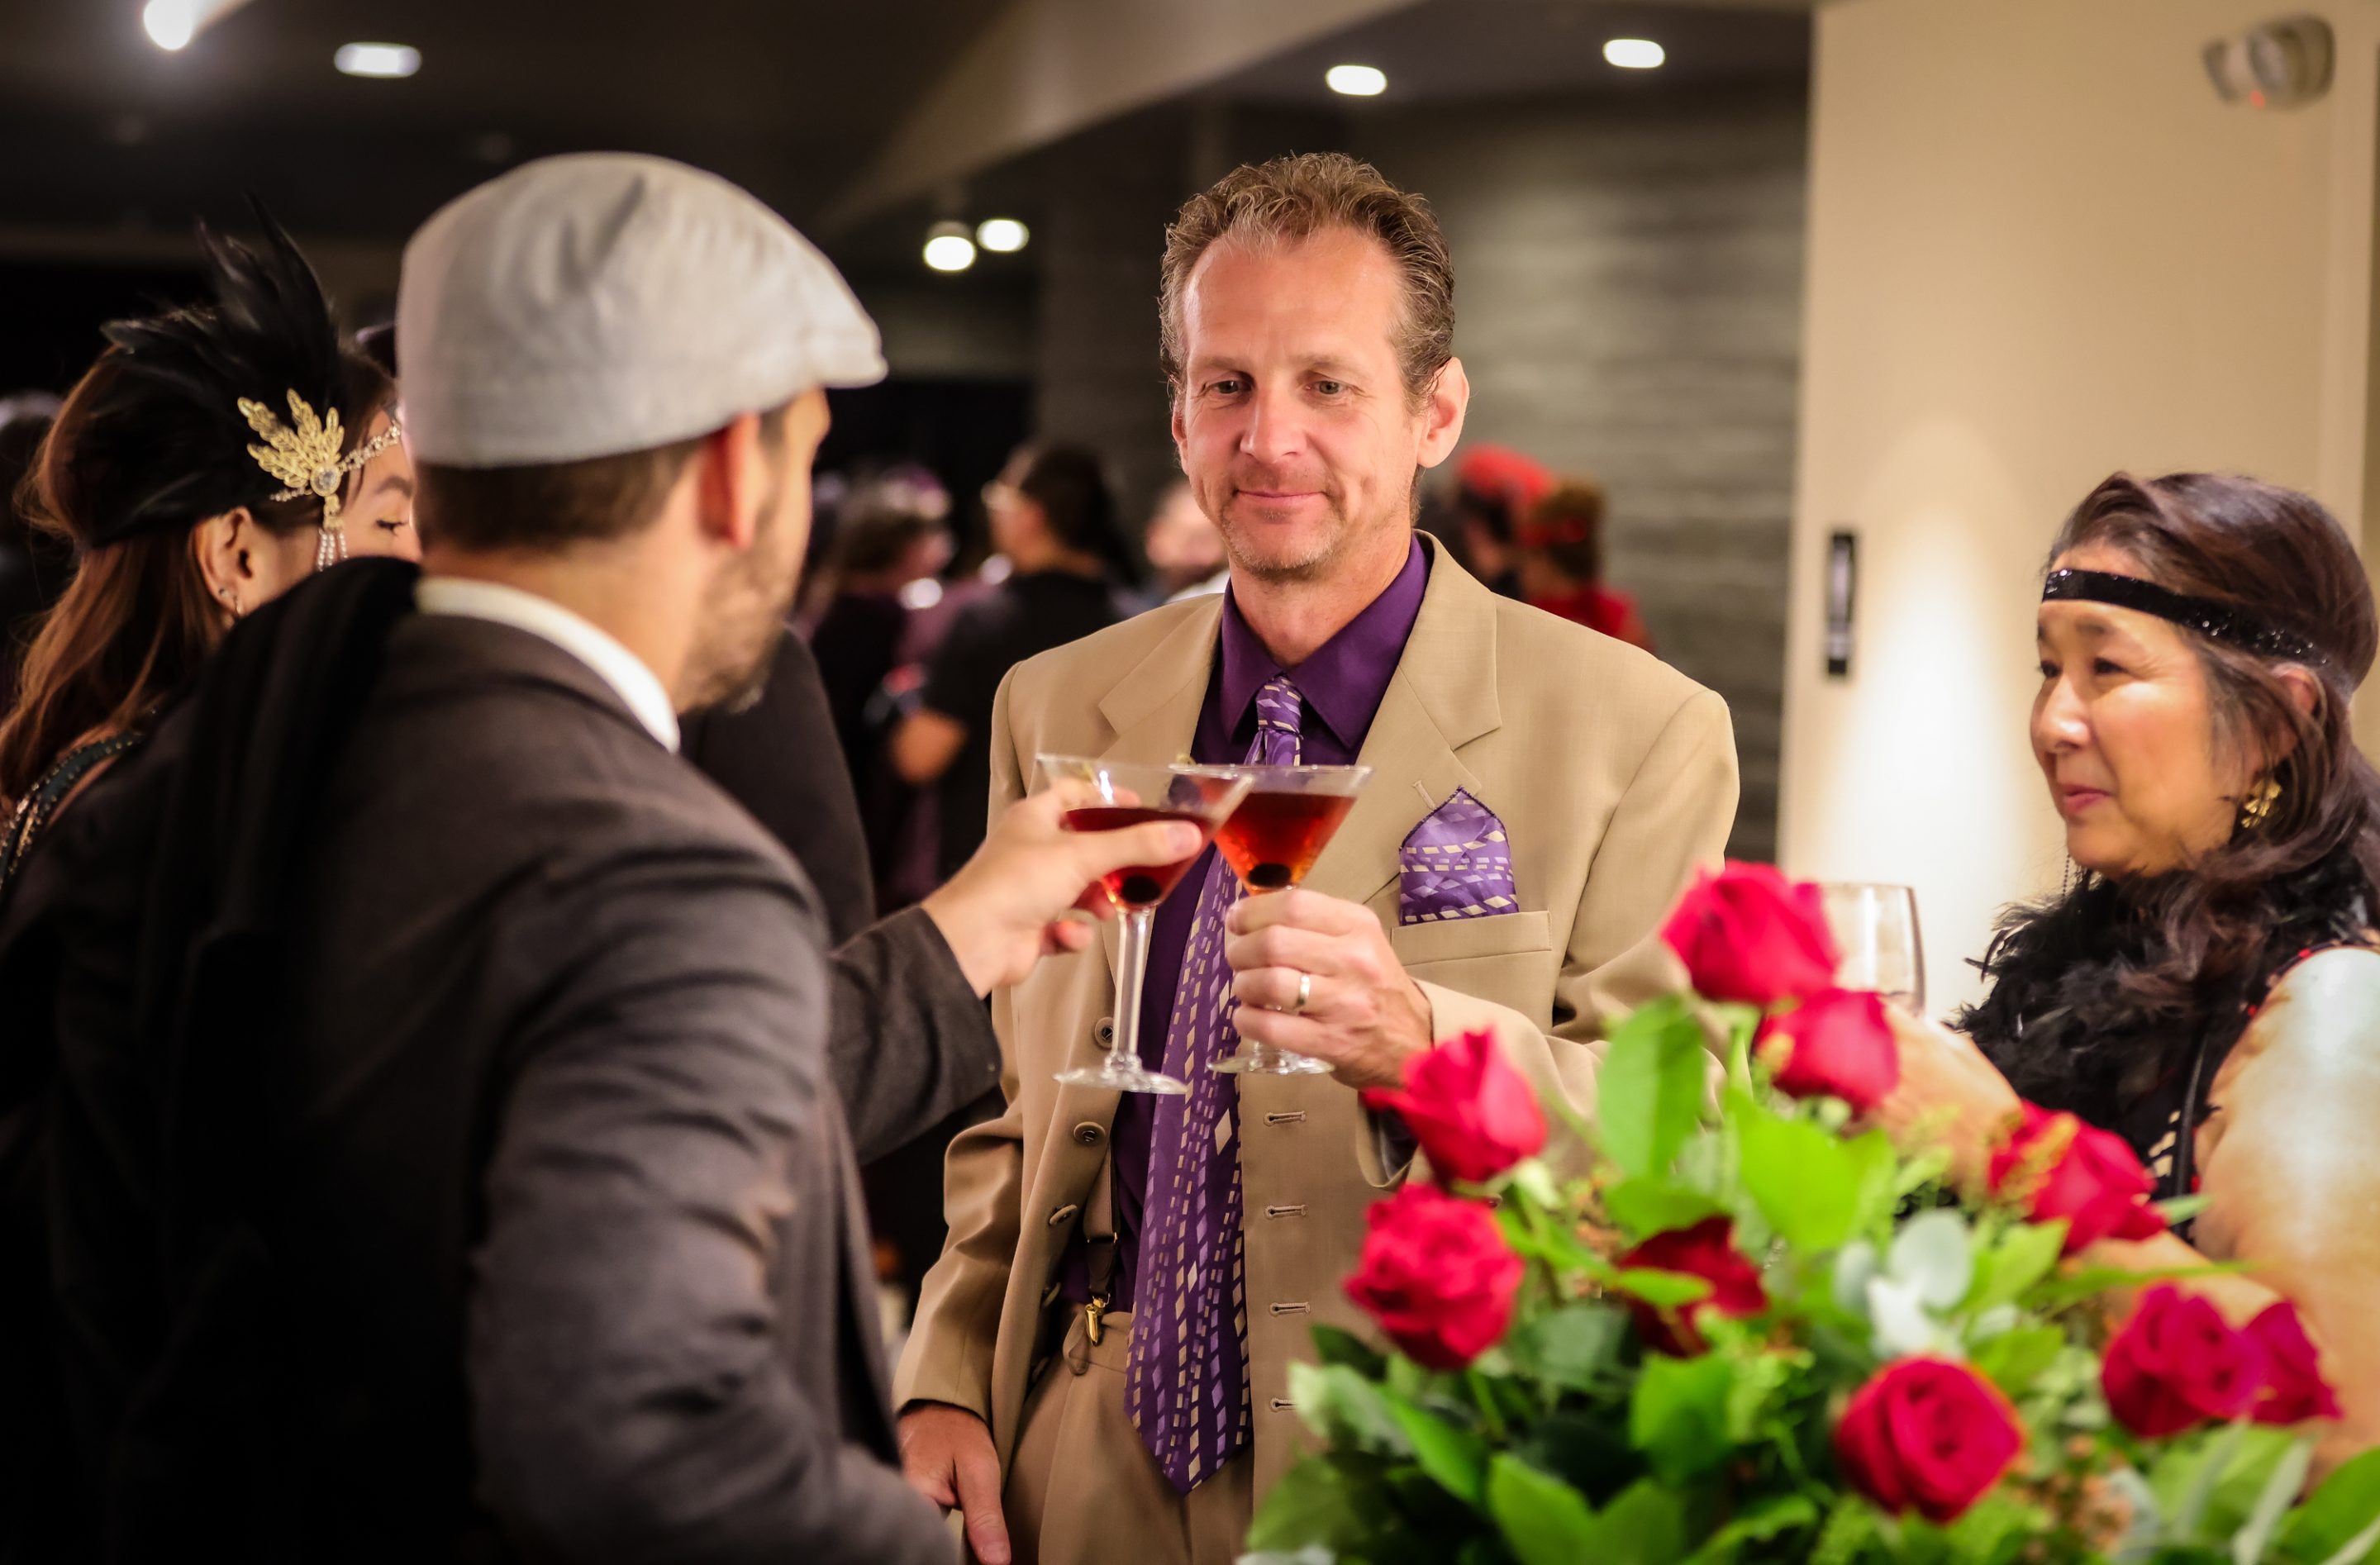 A man in a suit and tie is holding a glass of wine at a Sonoma County Non-Profit Organization event.